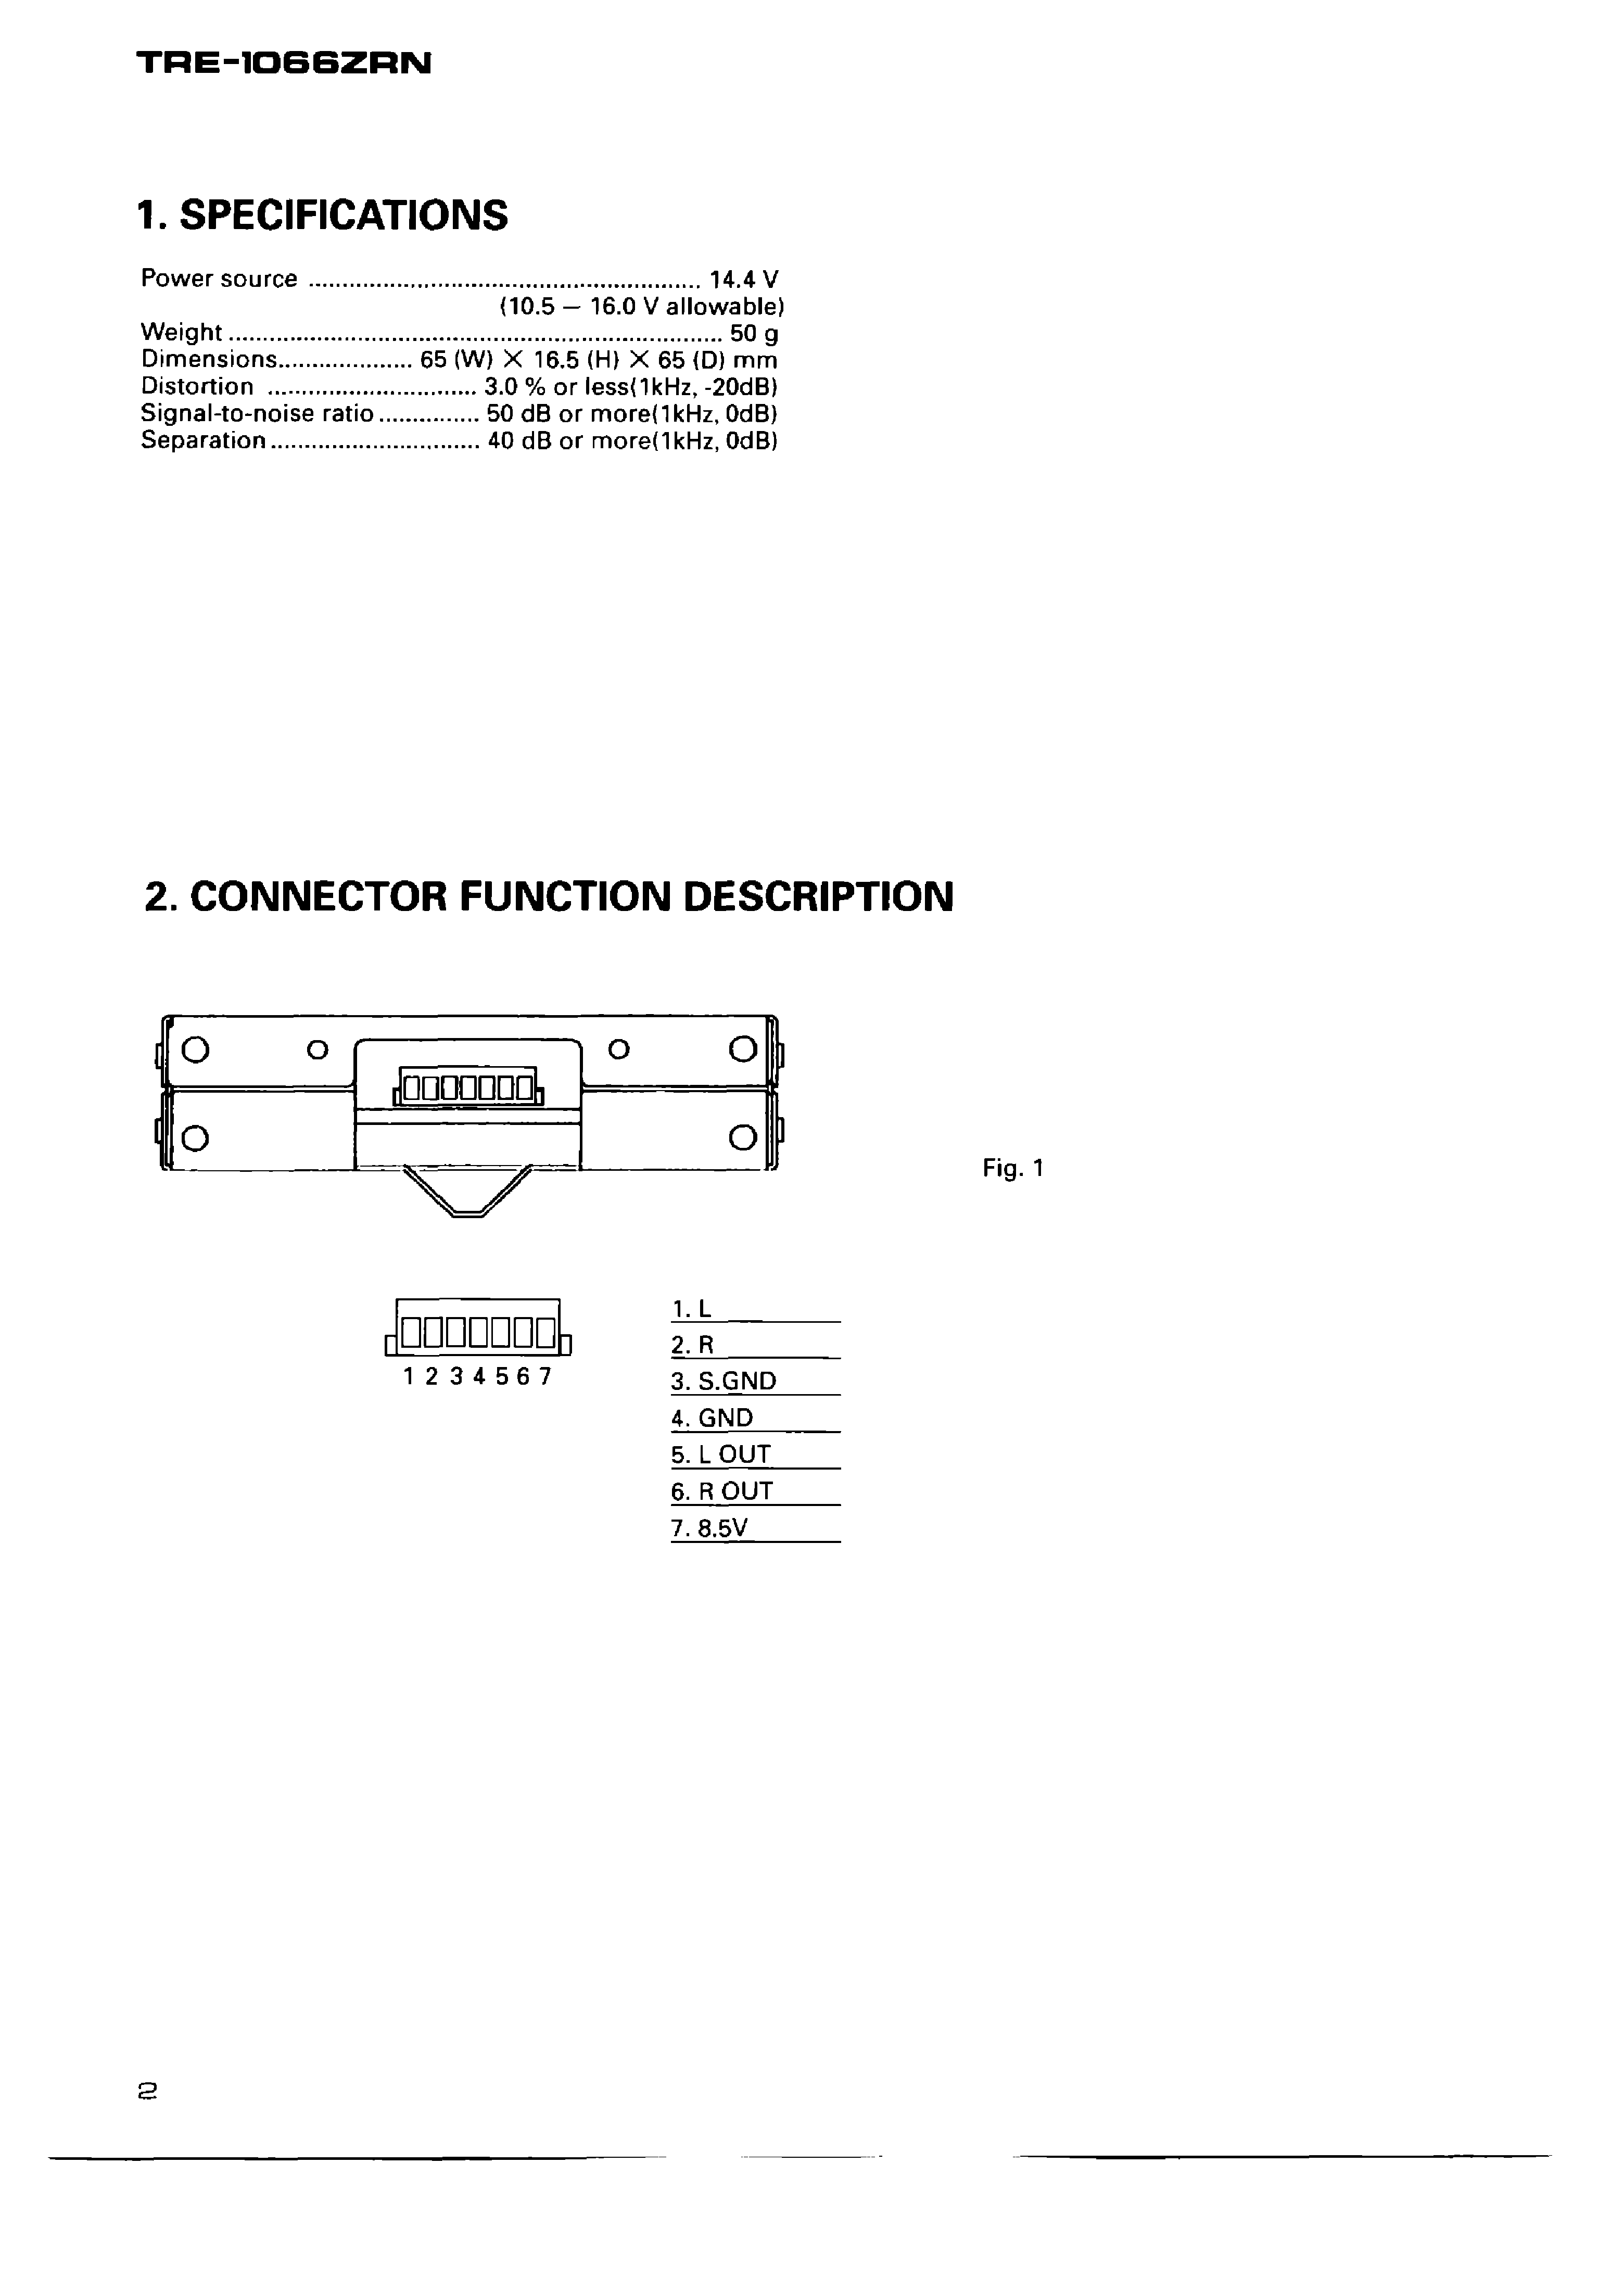 PIONEER TRE-1066ZRN CRT1898 RENAULT service manual (2nd page)